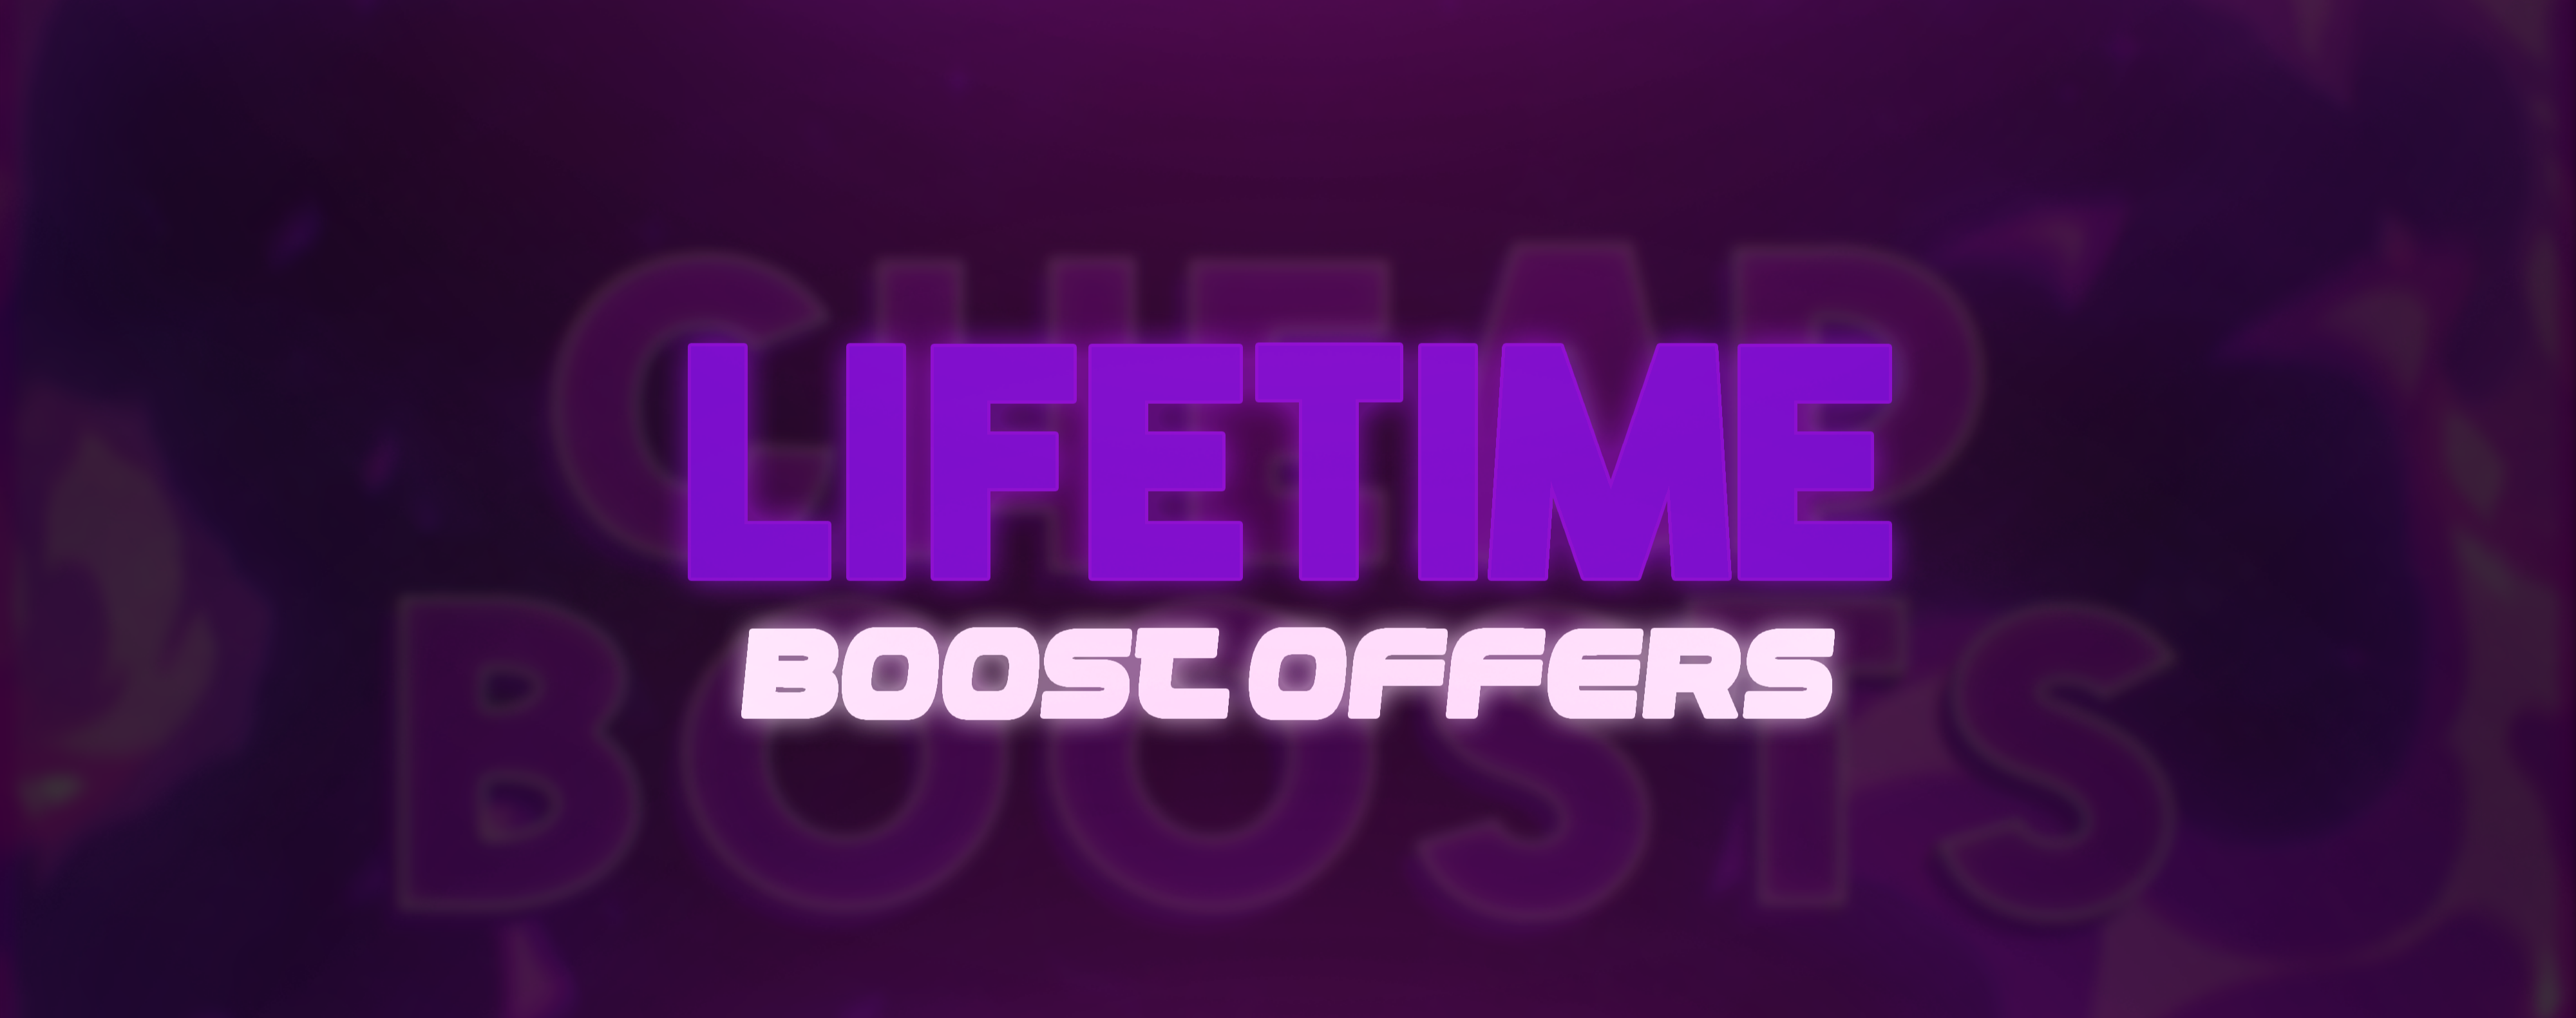 Lifetime Boost Offers